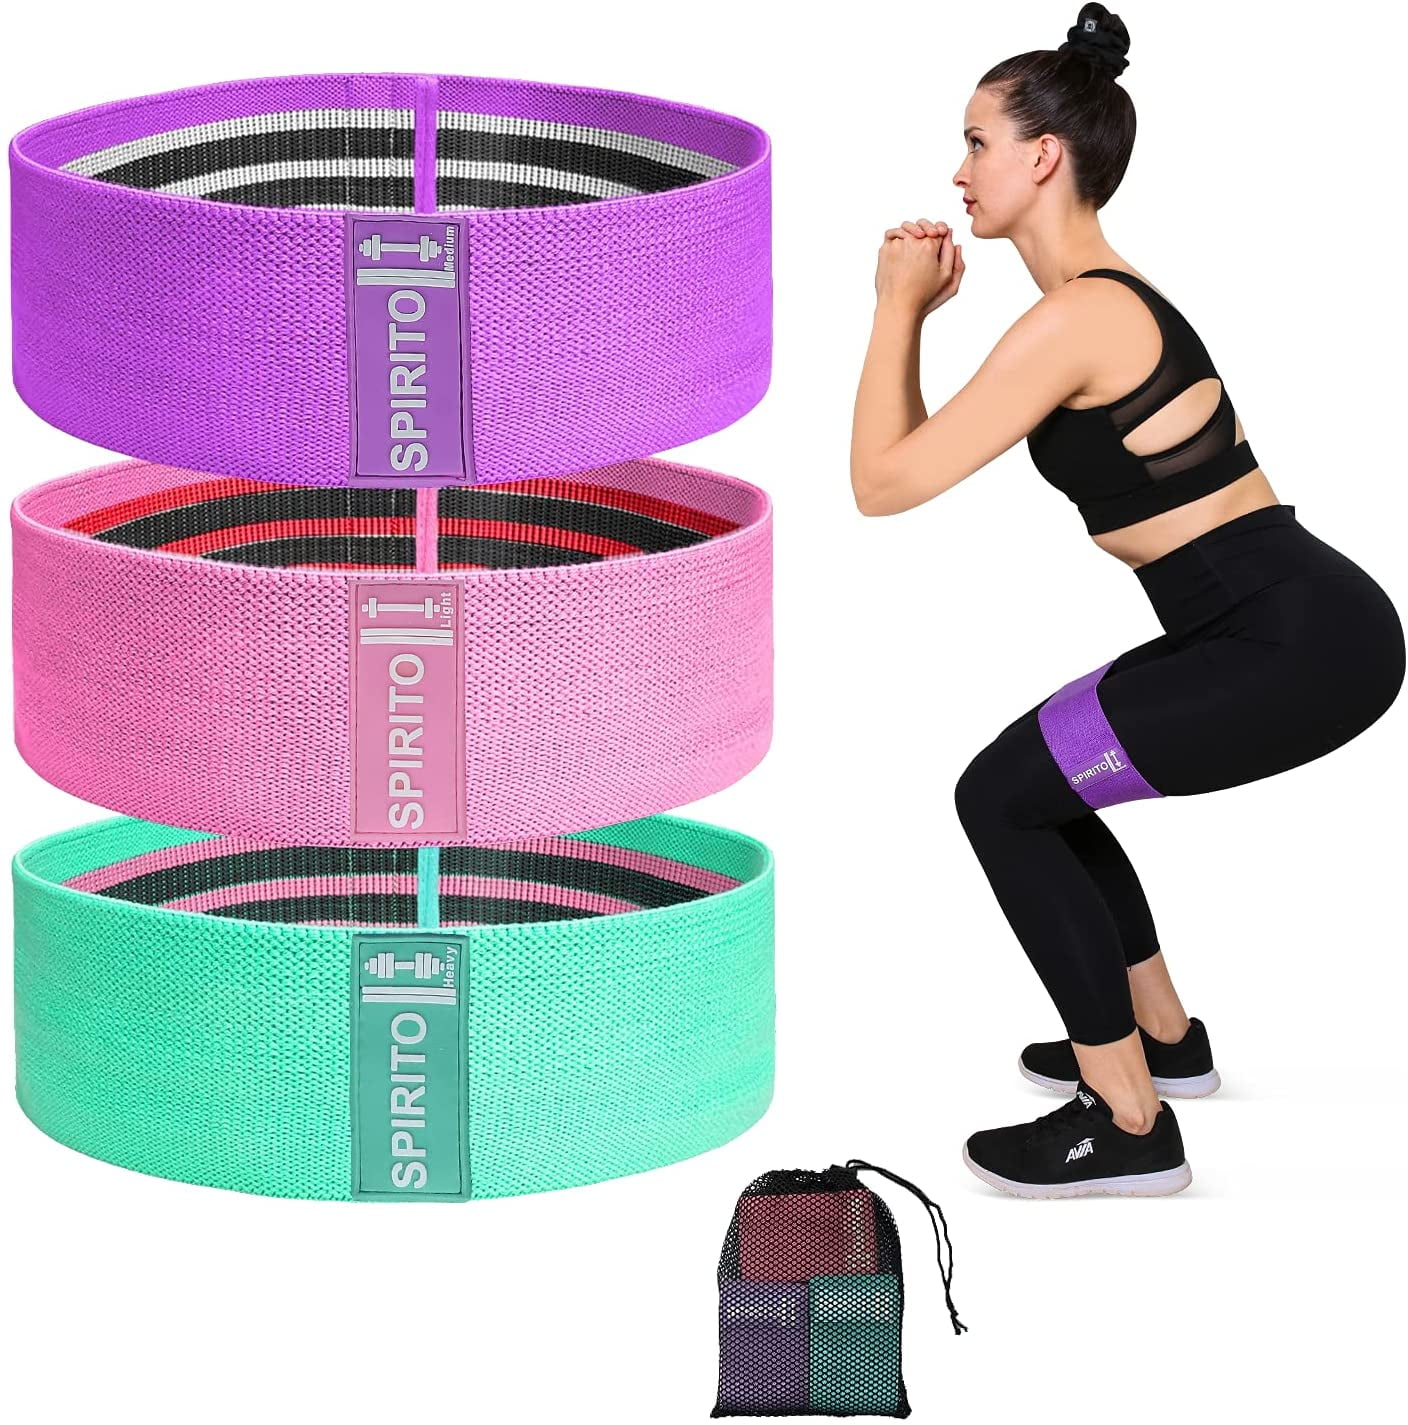 3 Levels Glute bands. Non-Slip Booty Bands Resistance Bands for Legs and Butt 